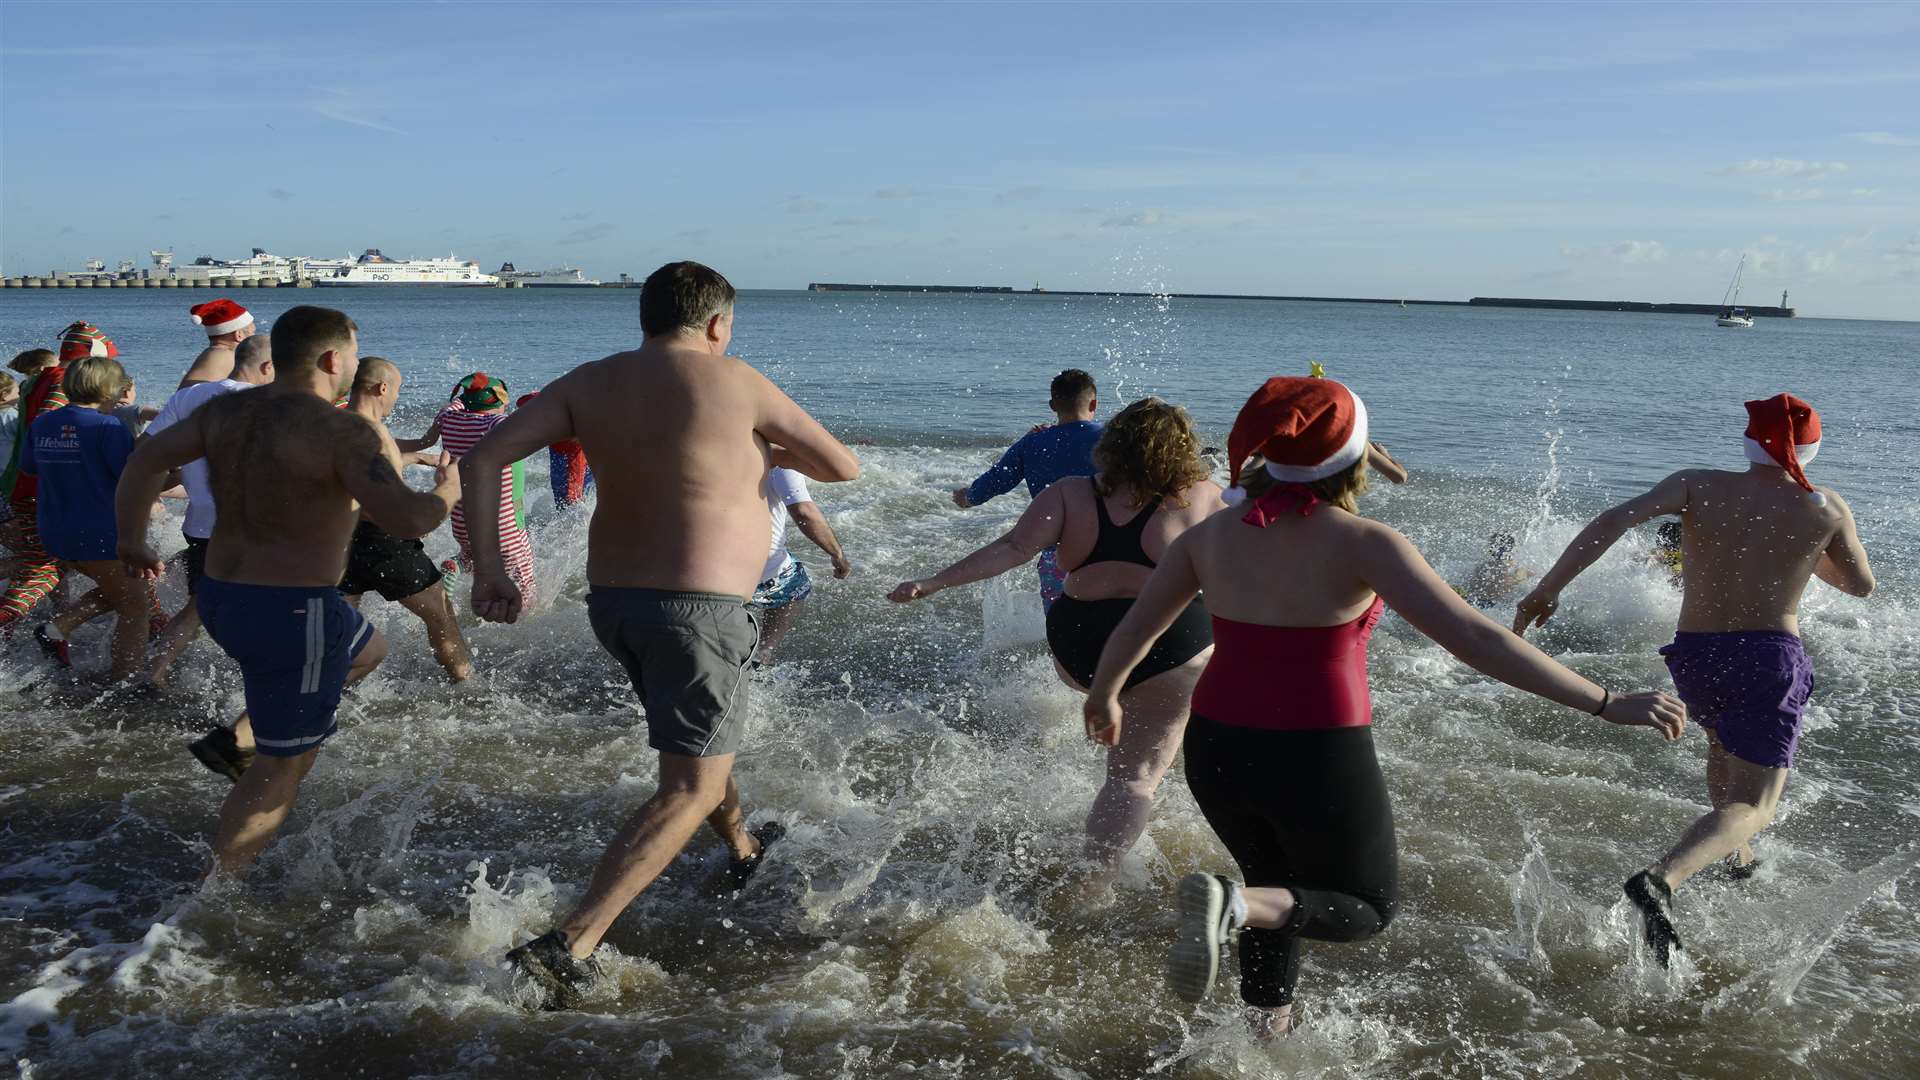 Bathers charge into the water for the Dover Boxing Day Dip.